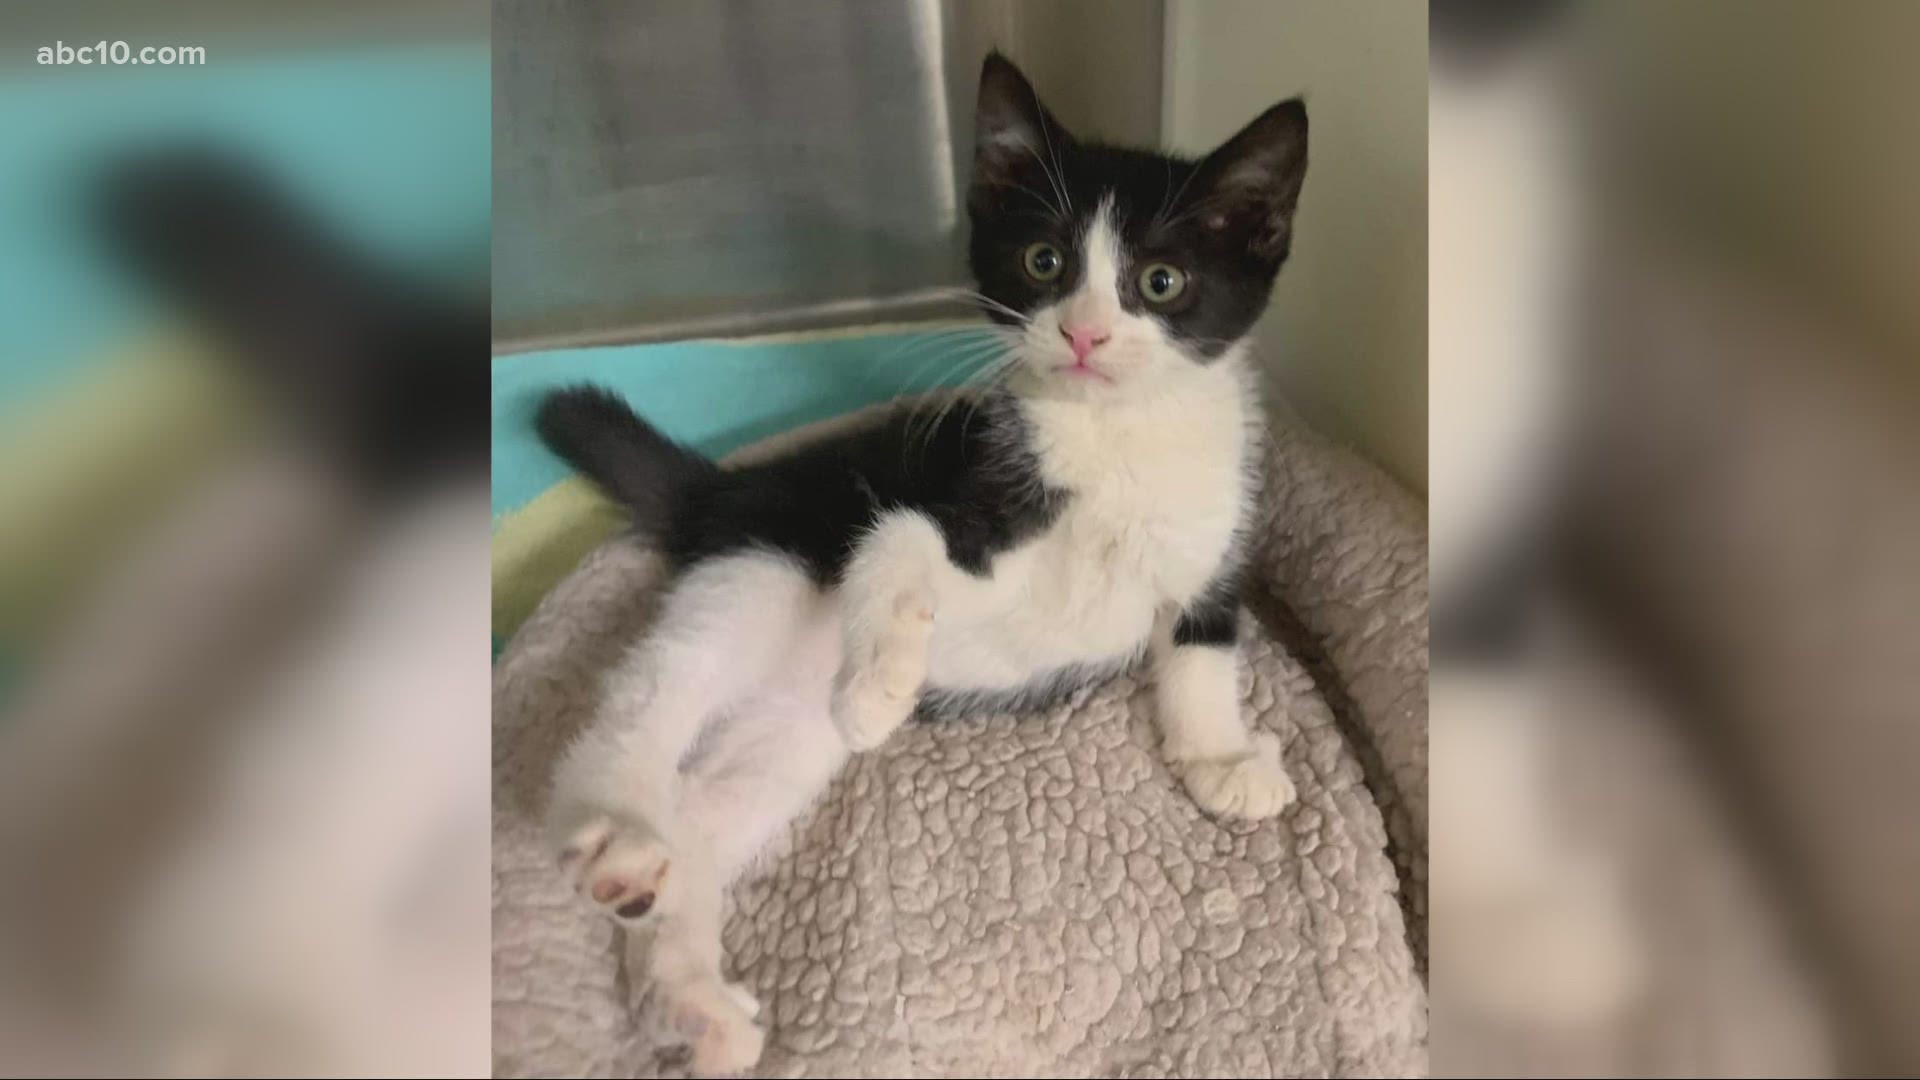 The Yolo County Animal Shelter is celebrating National Kitten Day by trying to find fur-ever homes for the many sweet kitties that have come to the shelter recently.